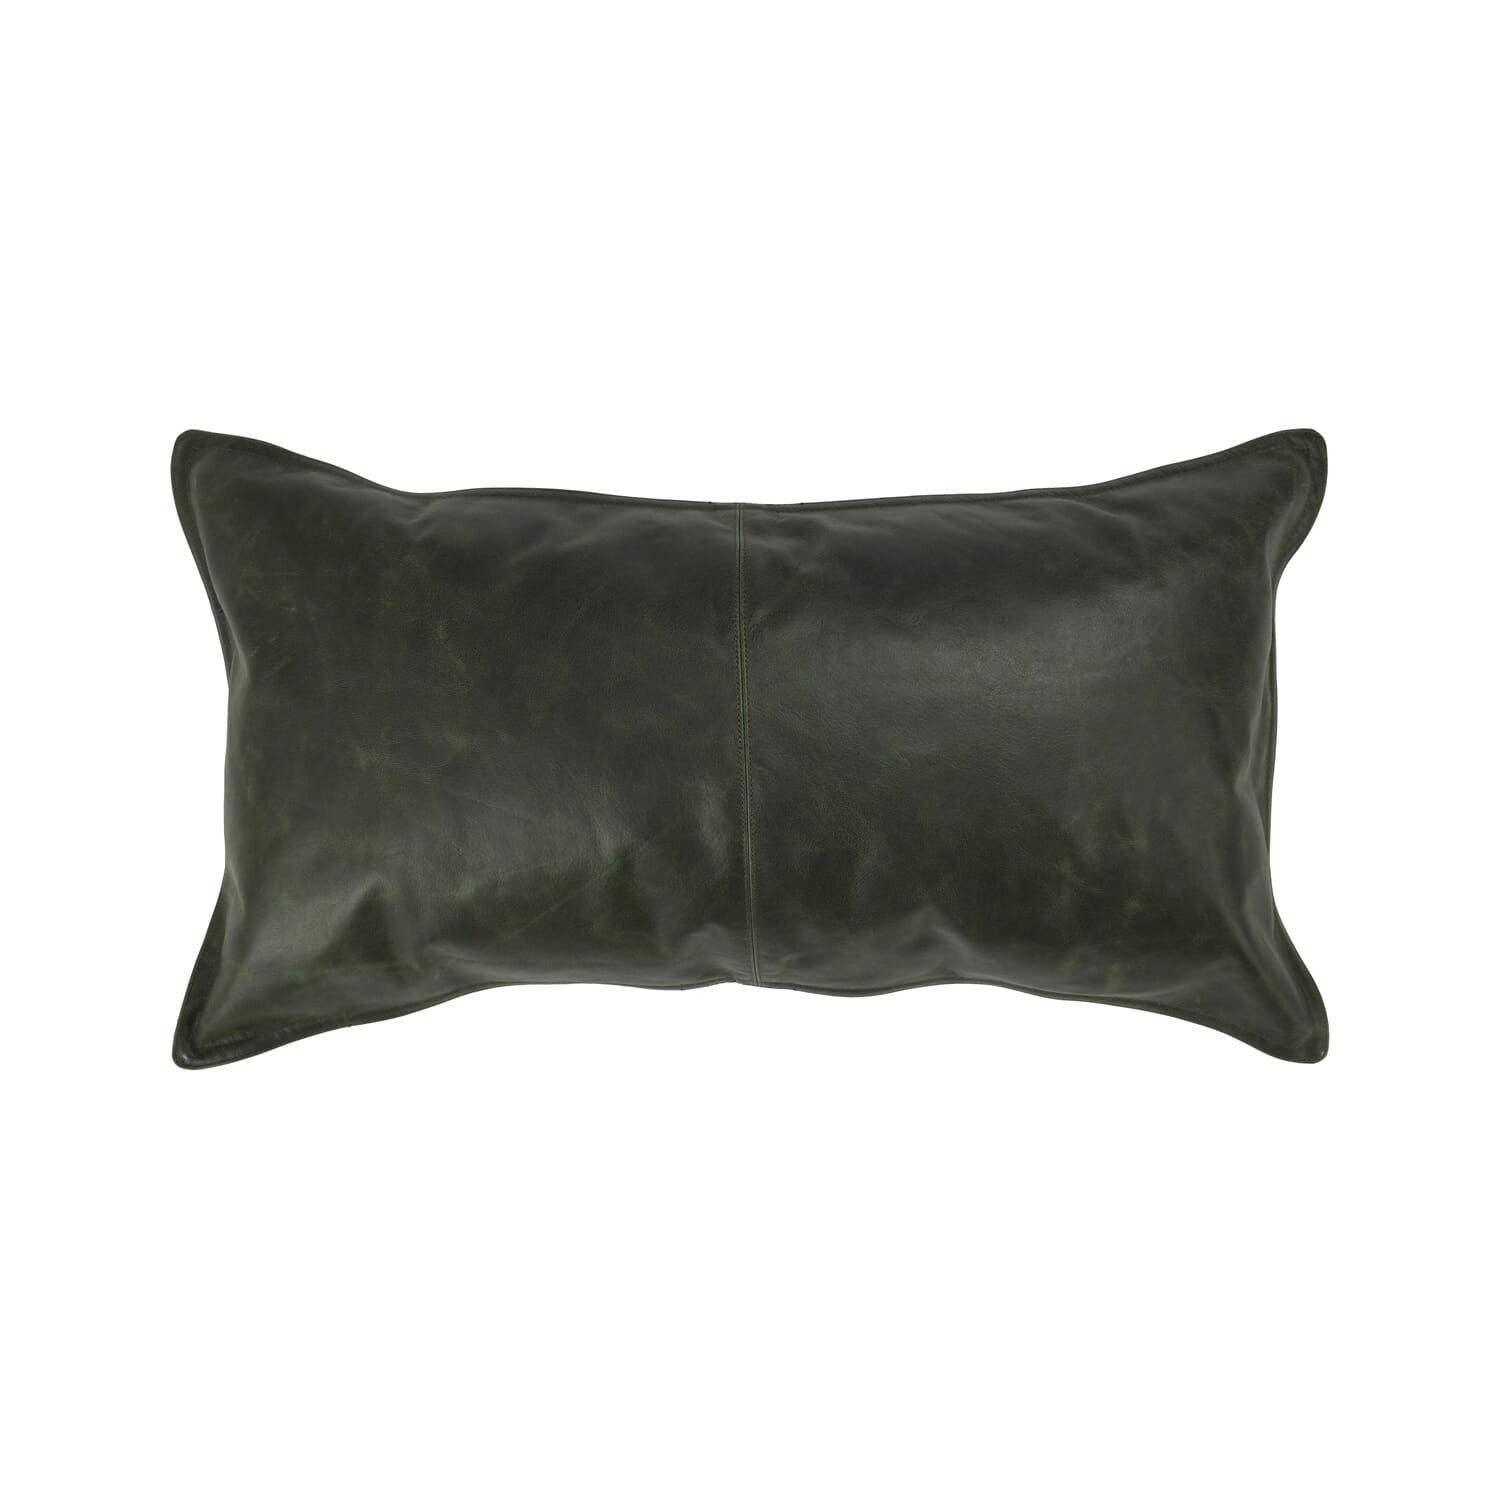 Leather Acre Forest 14x26 Pillow